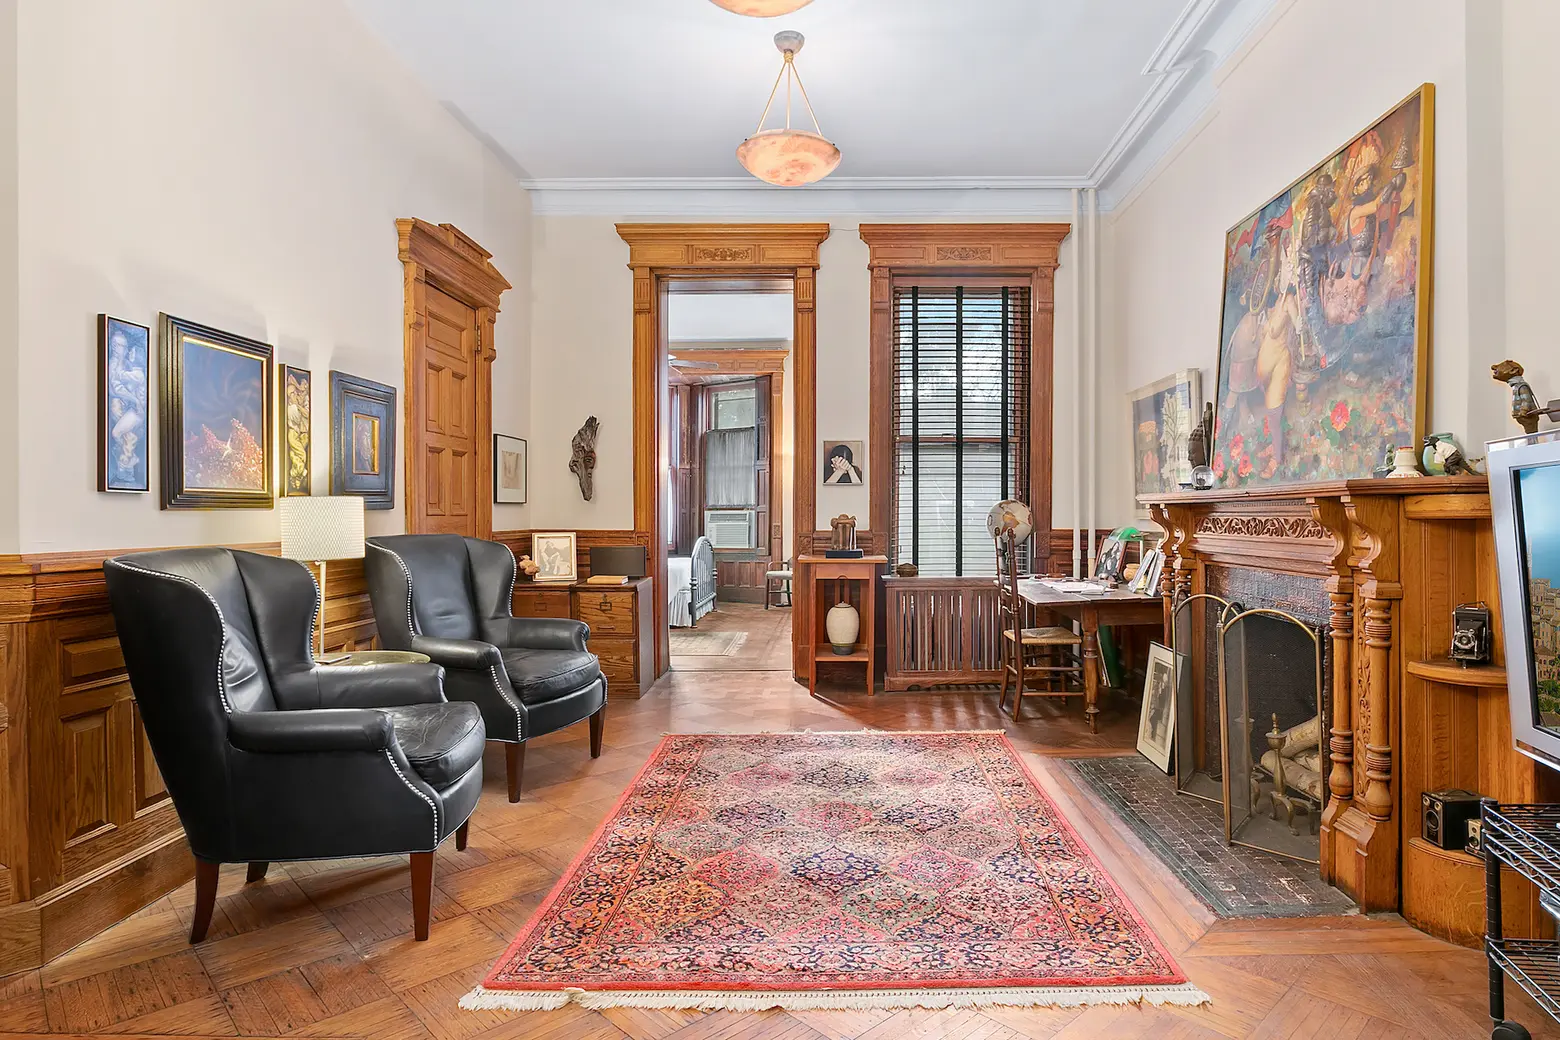 Six fireplaces, stunning woodwork, and a steam room at this historic Park Slope home, now asking $3.99M